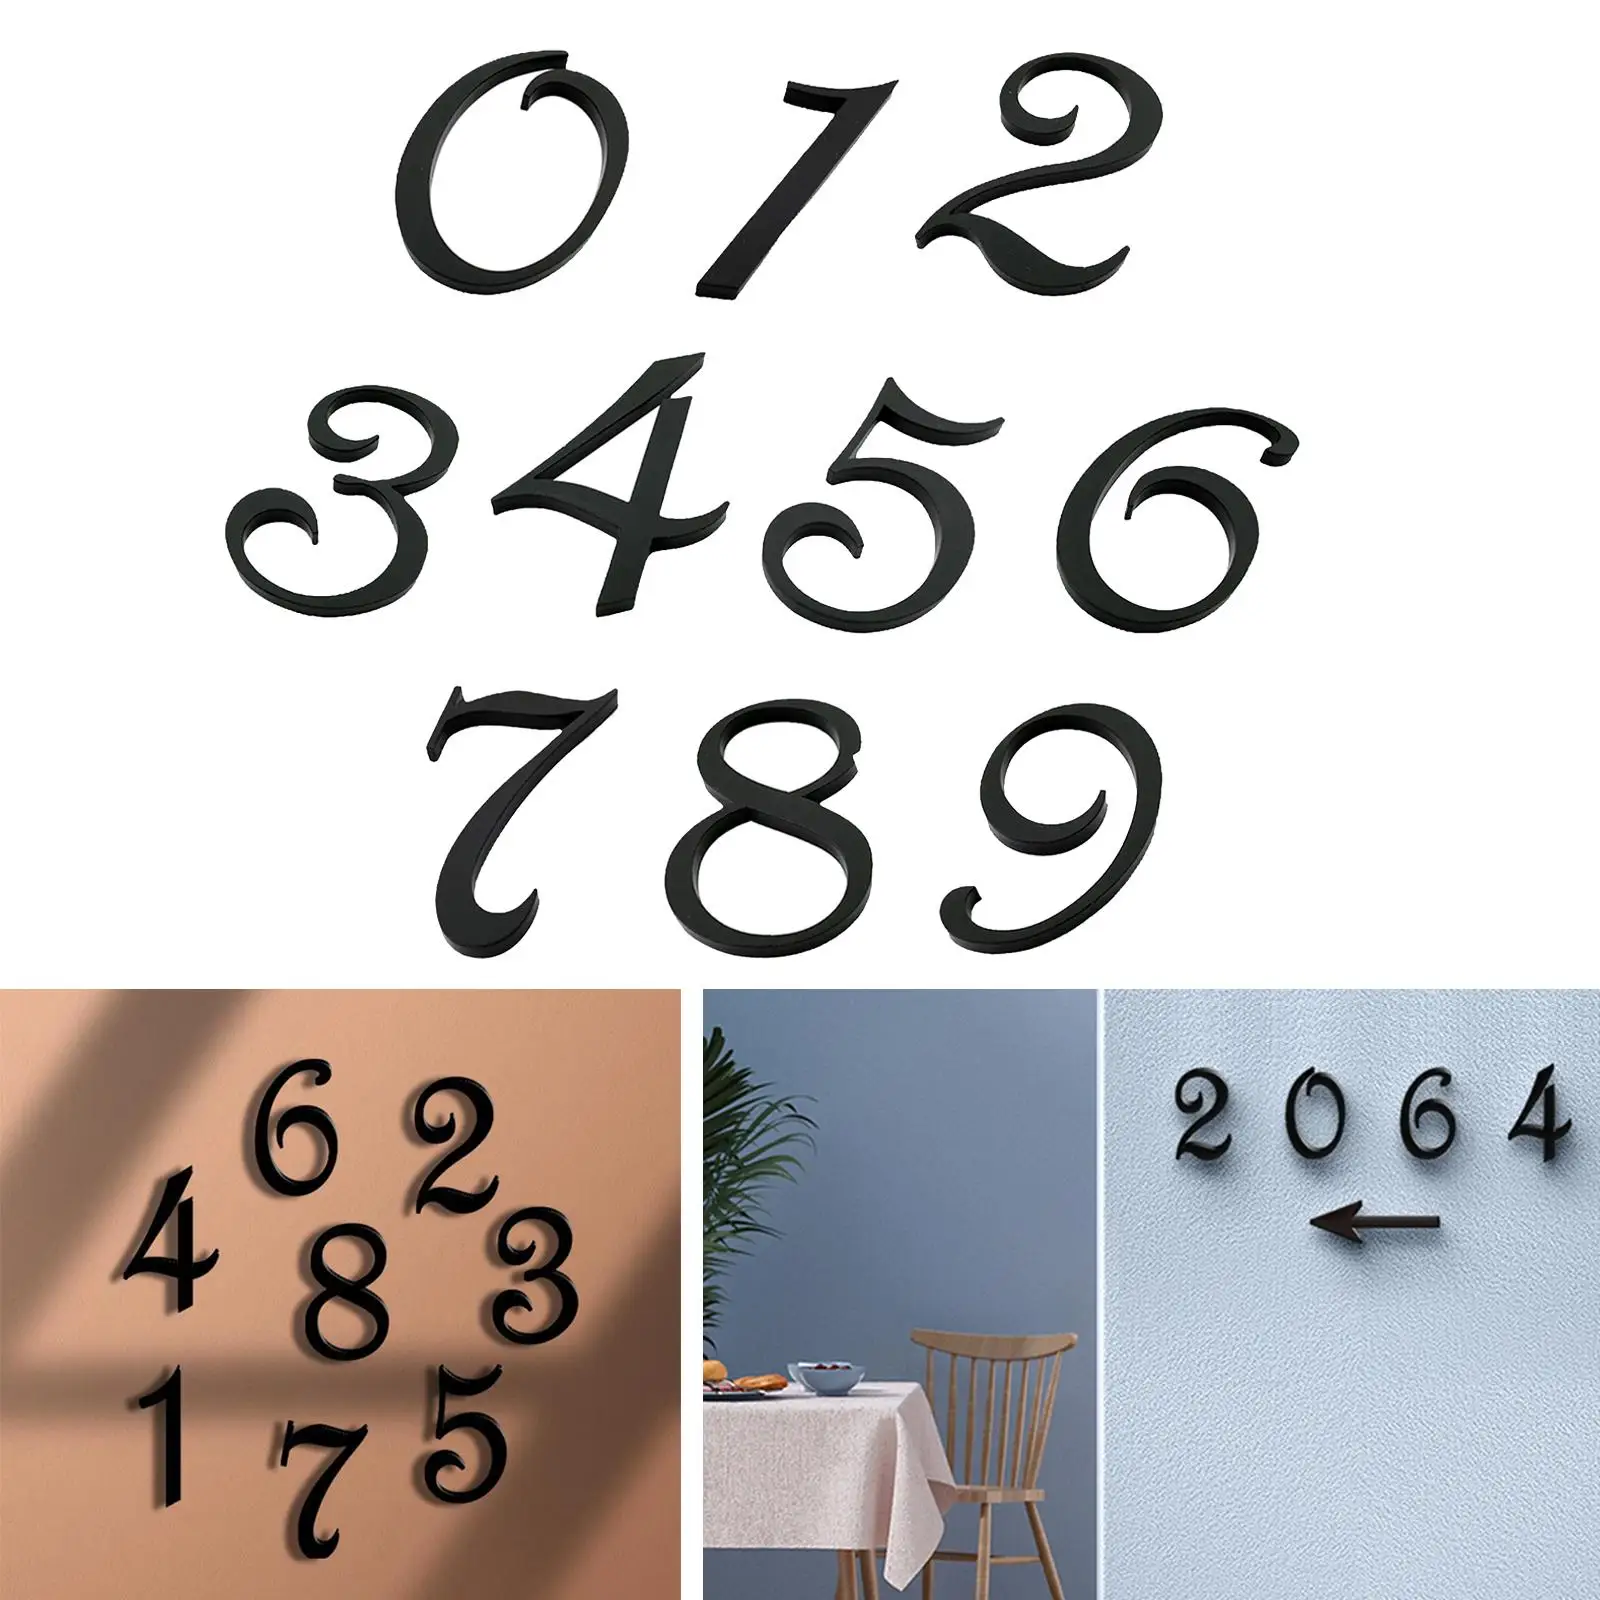 3D Numbers Flat Number Plates Self Adhesive Street Address Stickers for Room Door Office Apartment Hotel